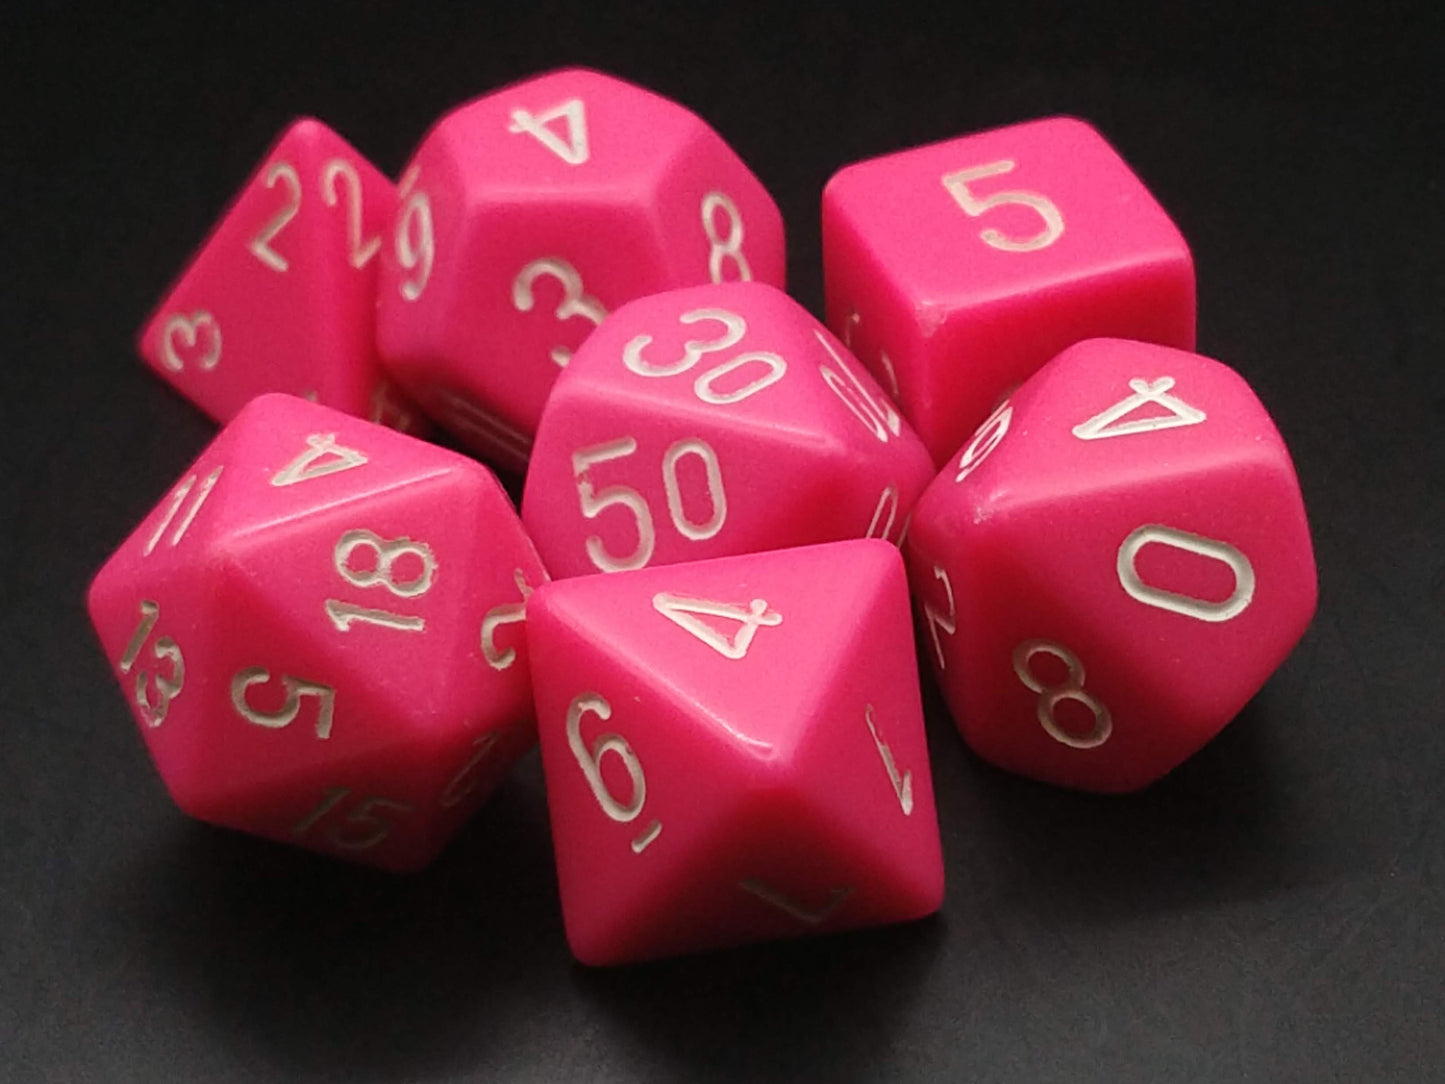 Chessex Opaque polydice sets